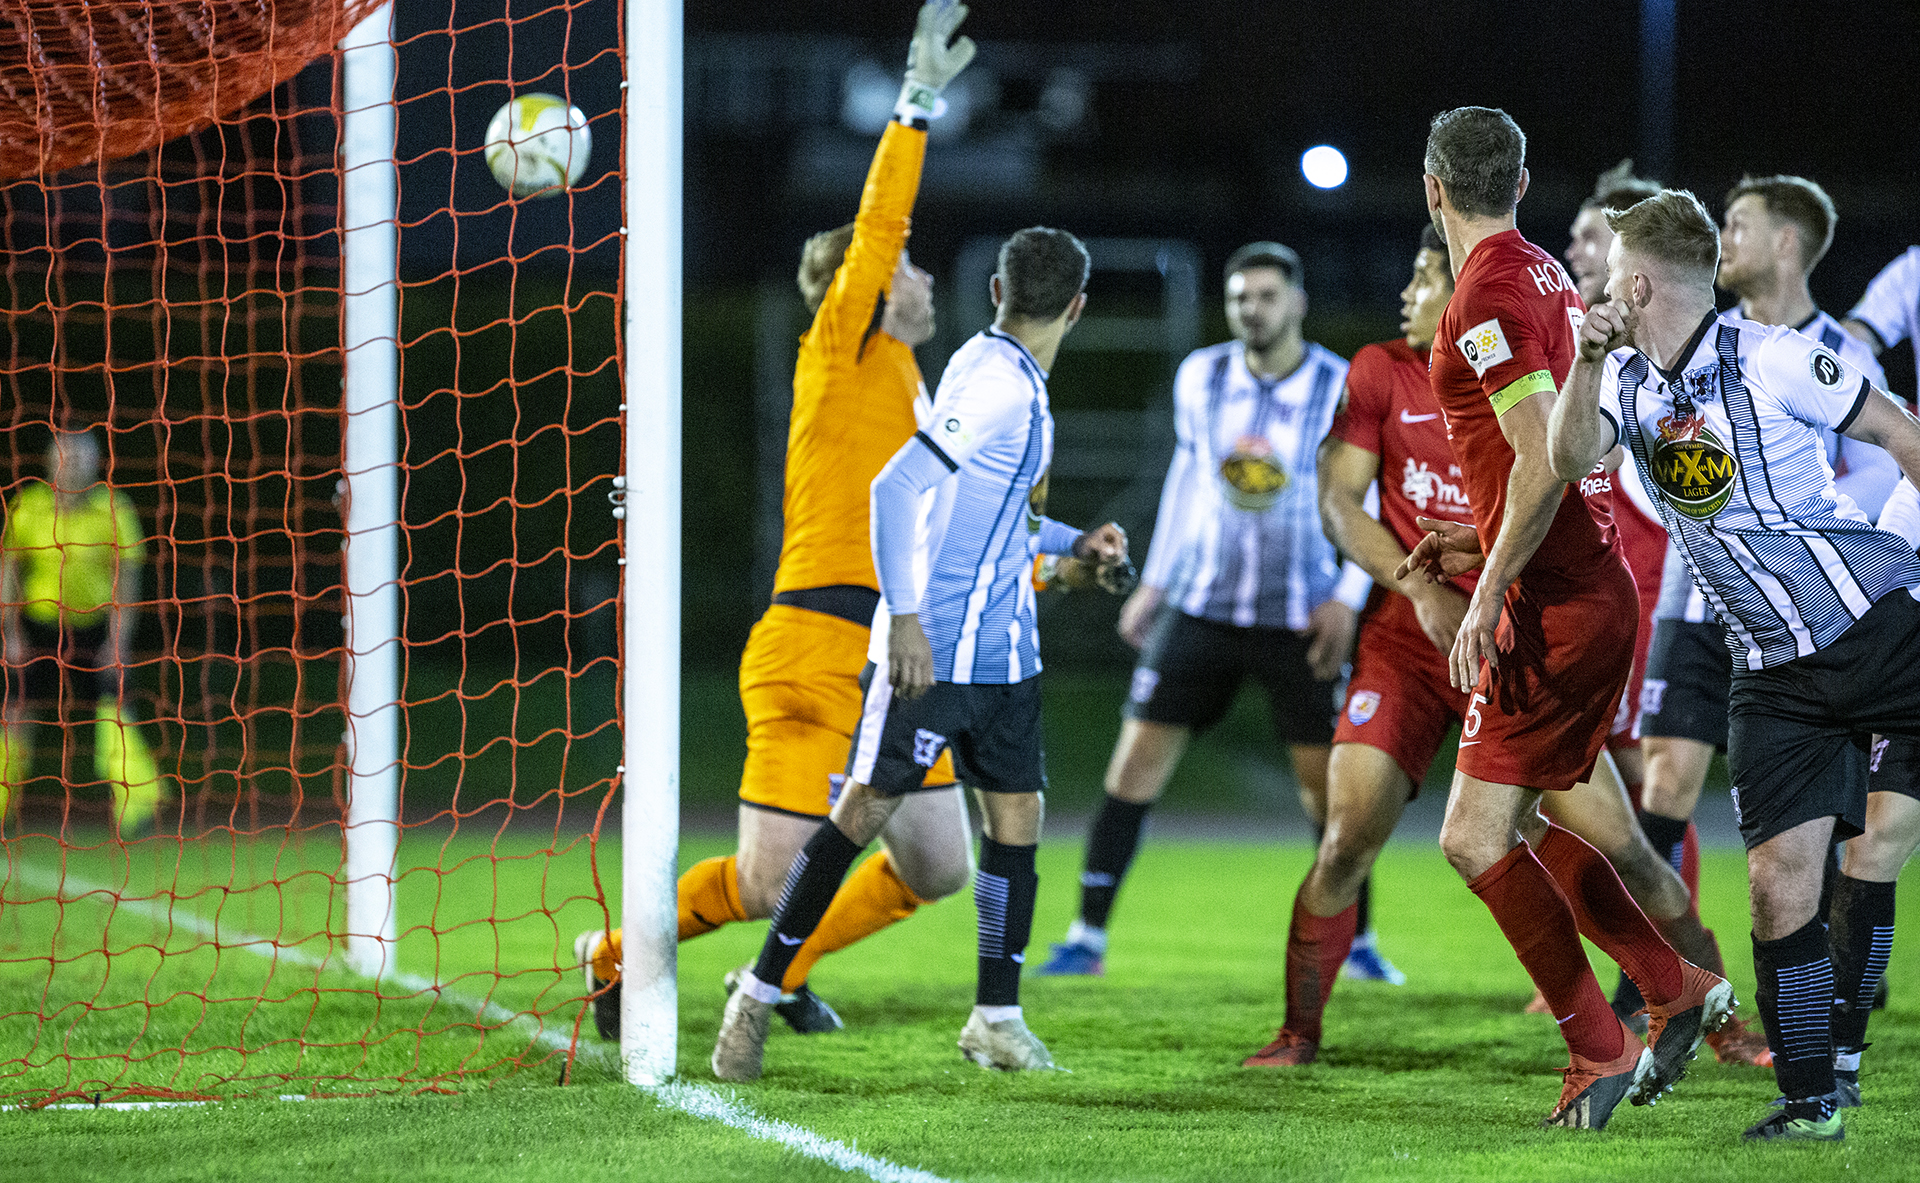 The Nomads' second goal flies in | © NCM Media